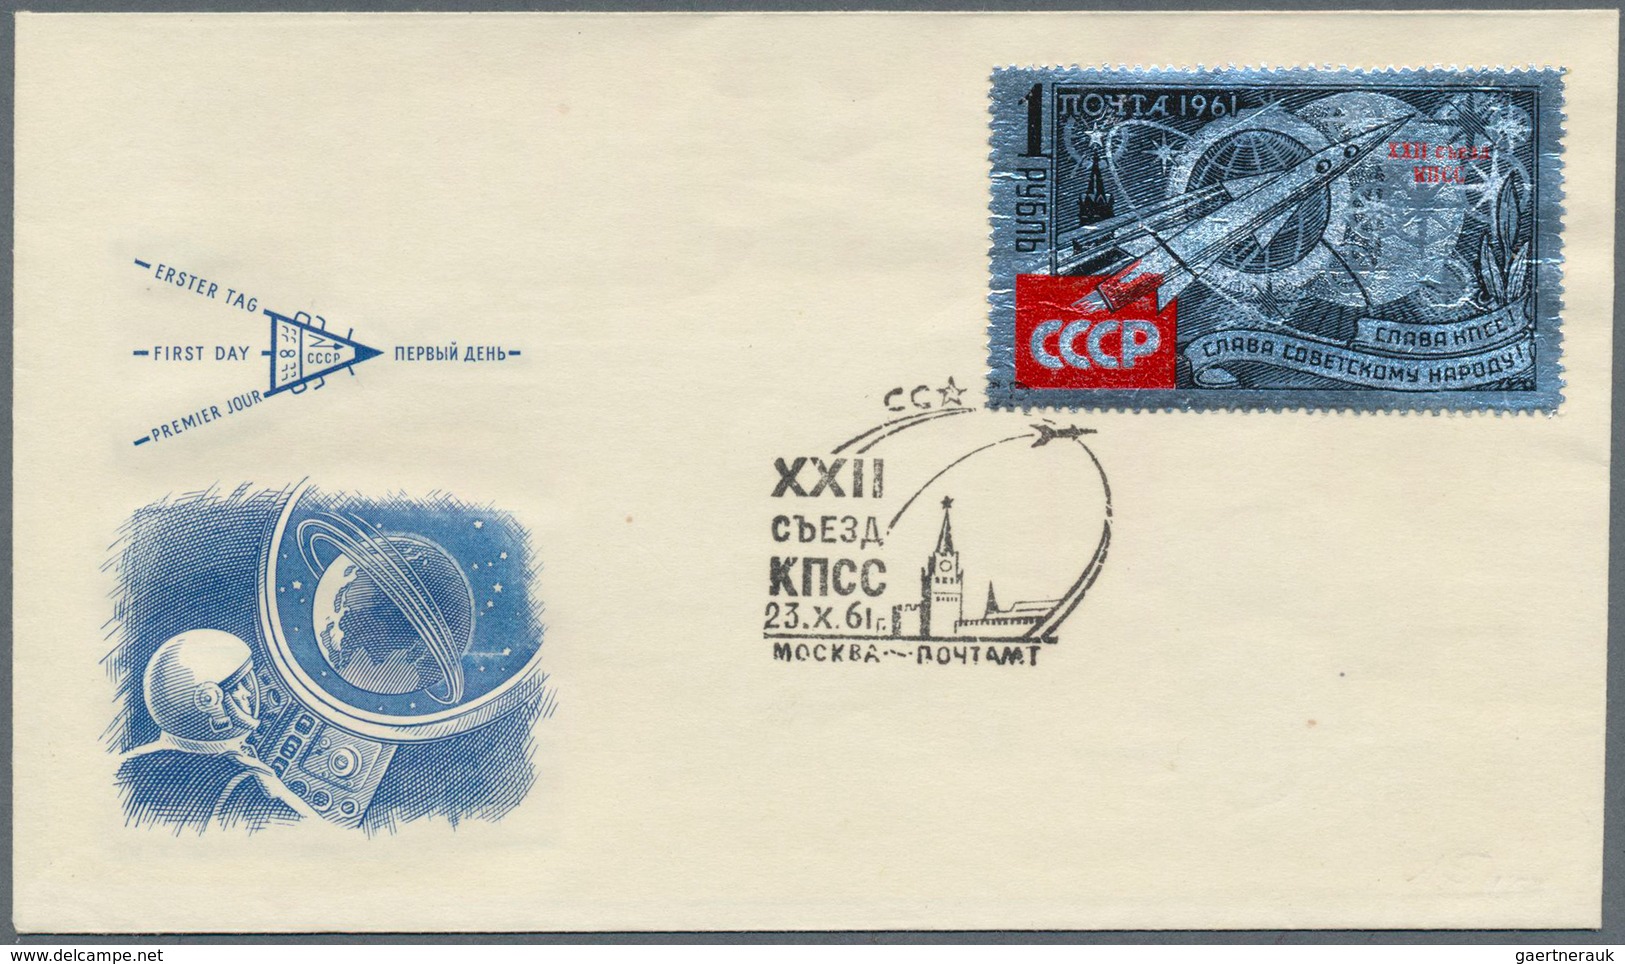 27896 Russland / Sowjetunion / GUS / Nachfolgestaaaten: 1875/1990 (ca.), accumulation with about 170 cover